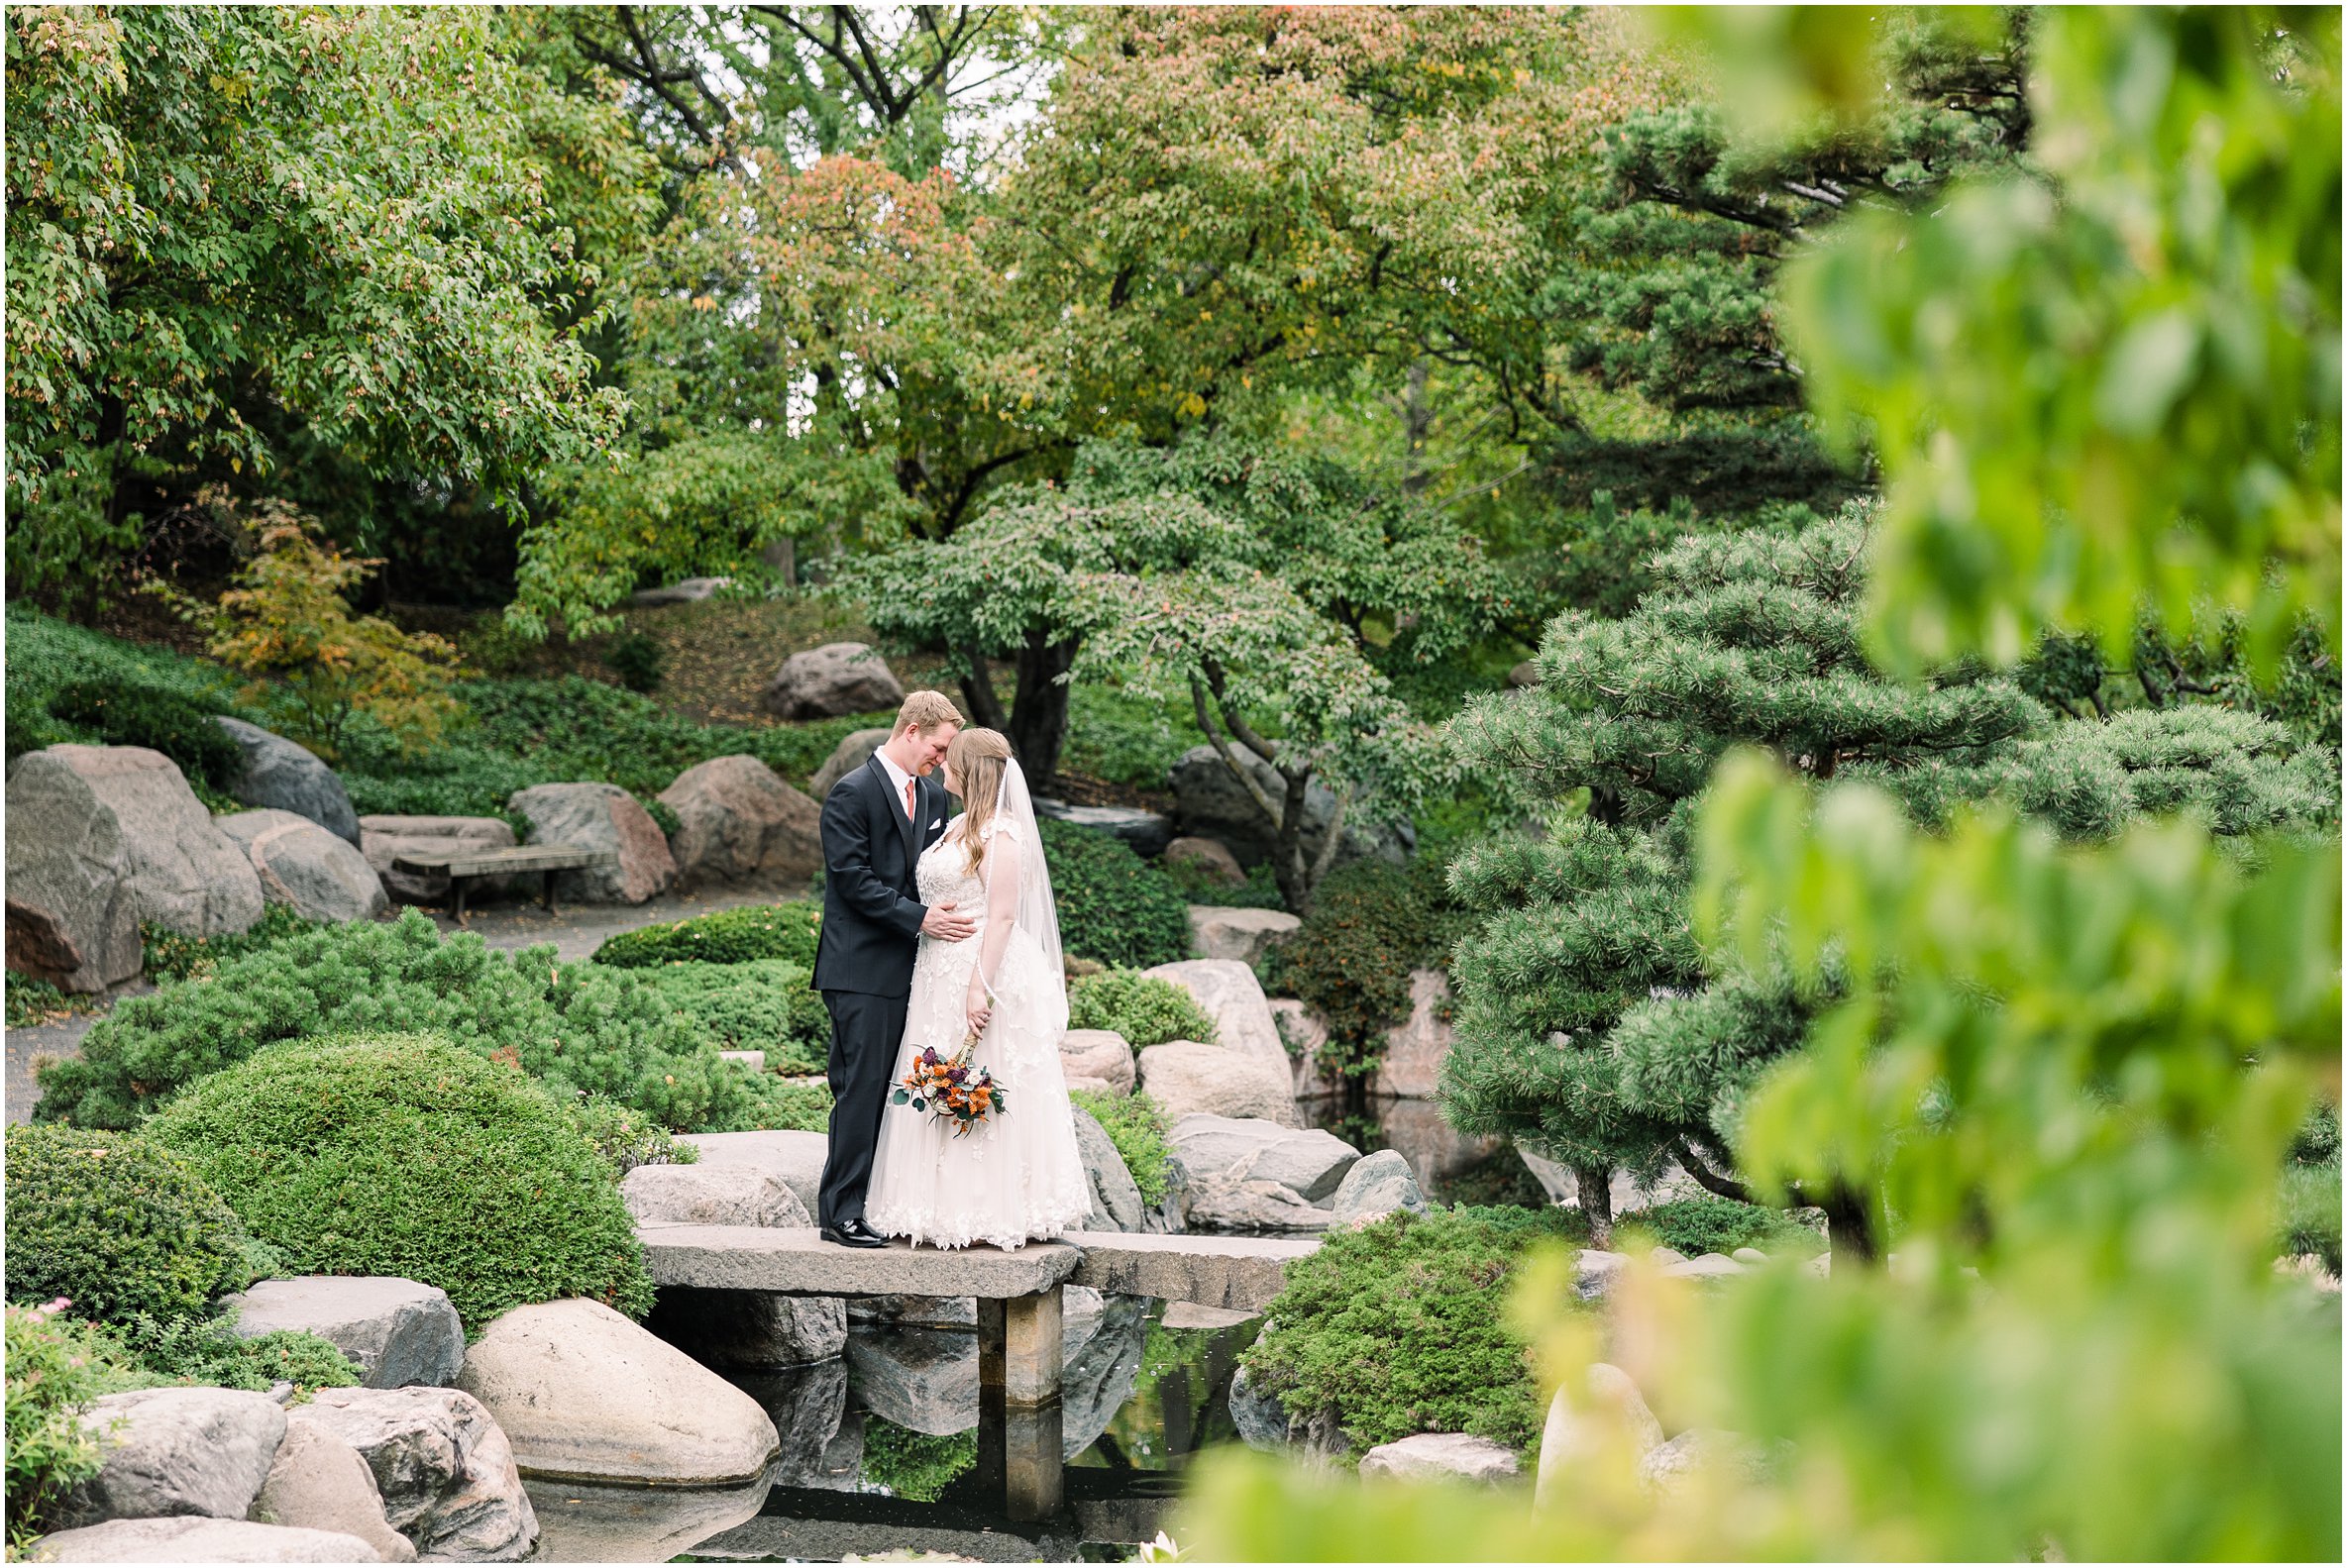 Fall wedding at como park zoo and conservatory in st paul minnesota